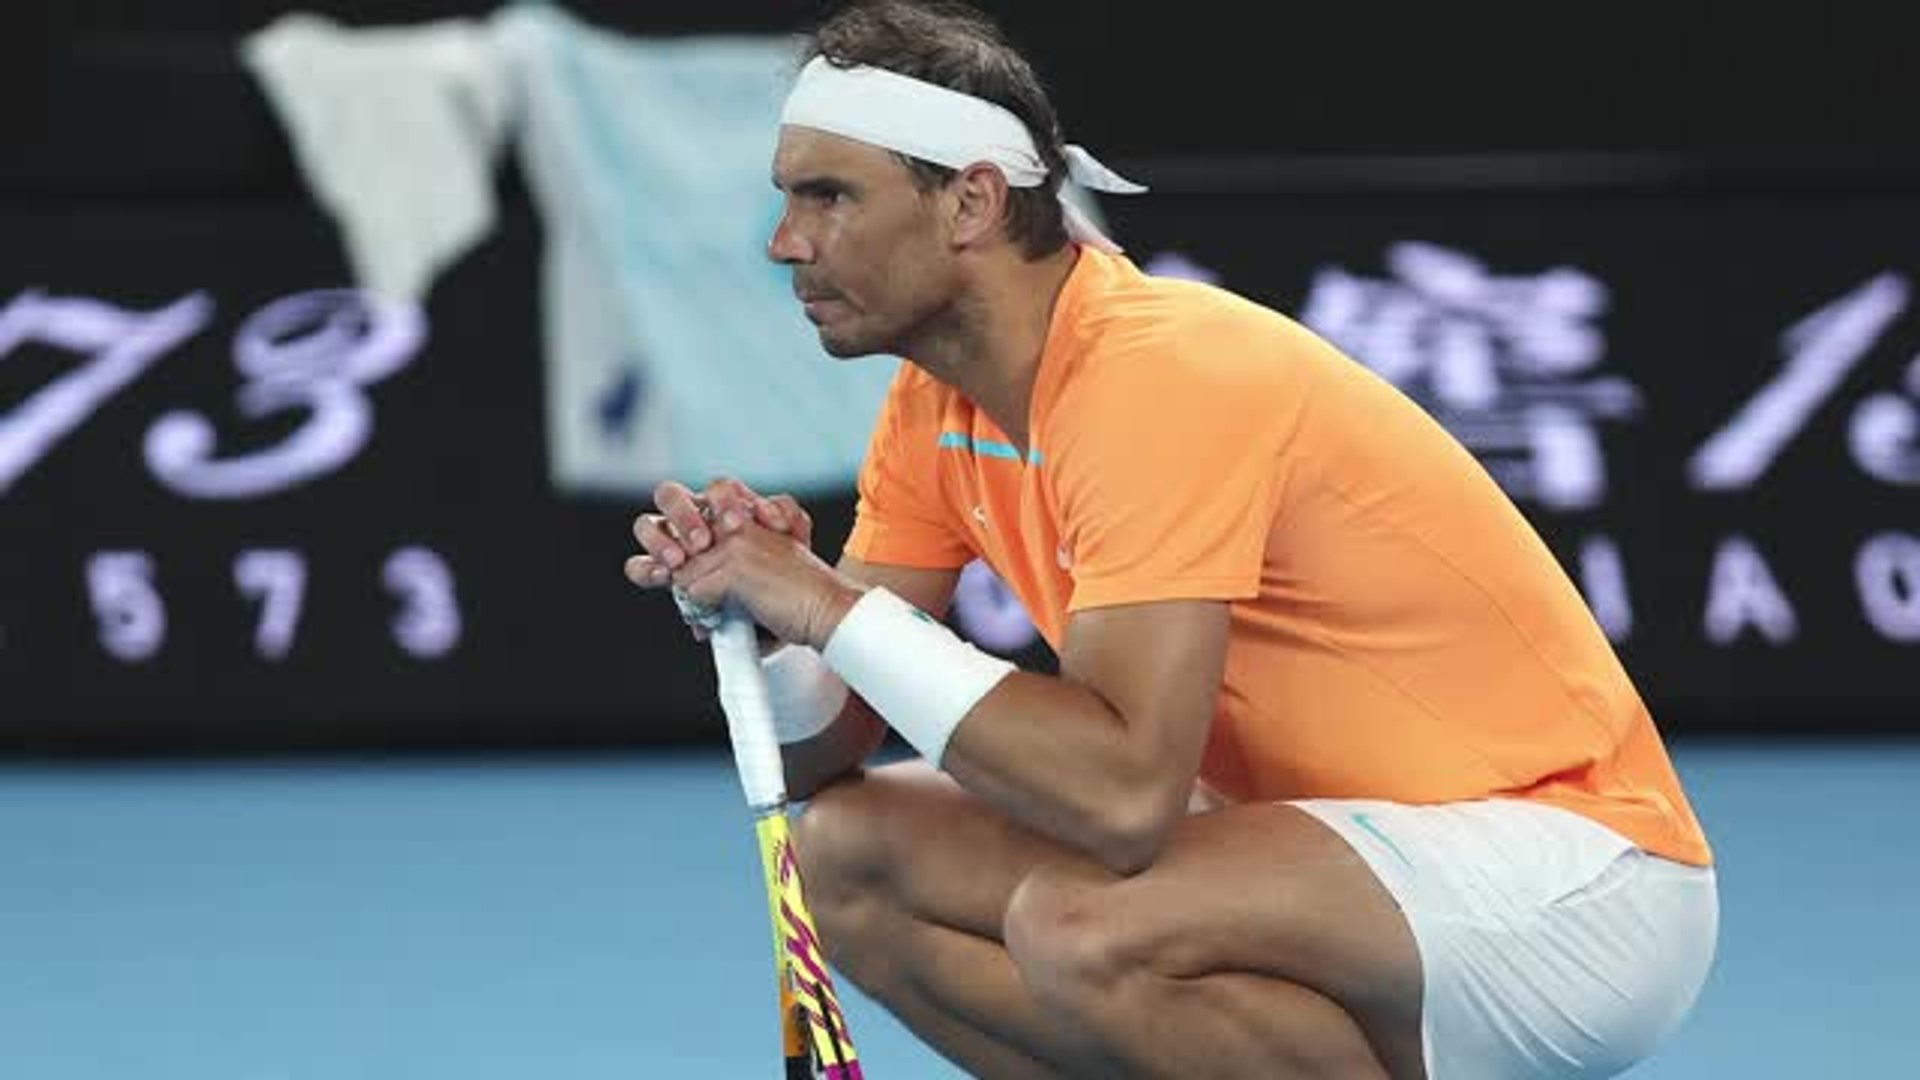 Breaking news - Nadal knocked out of Australian Open - video Dailymotion